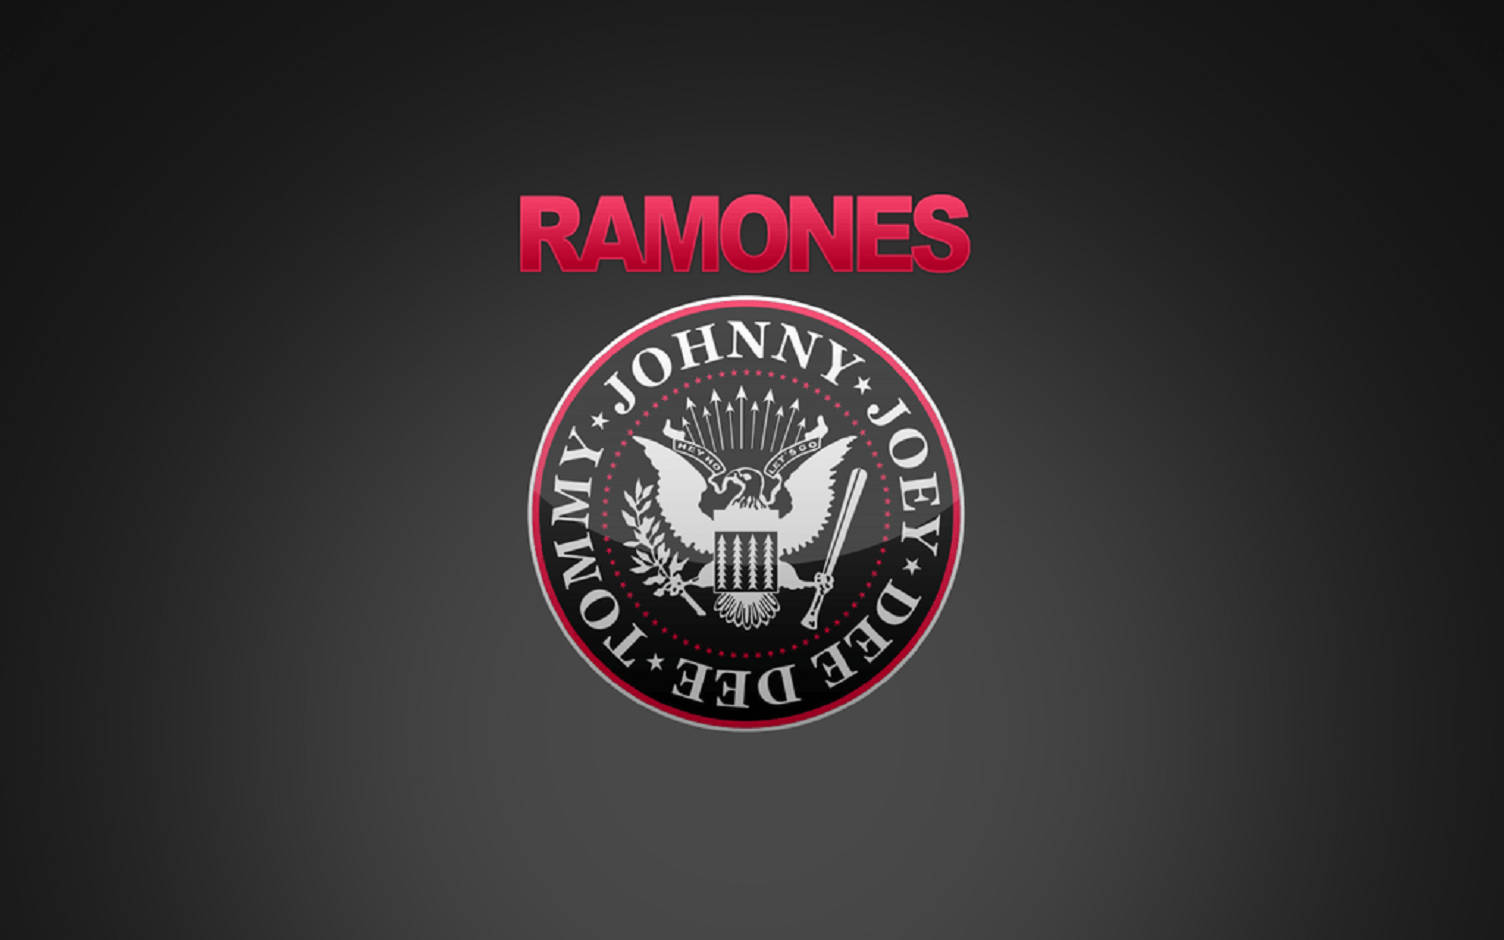 American Rock Band Ramones Eagle Seal Logo With Pink Typography Wallpaper